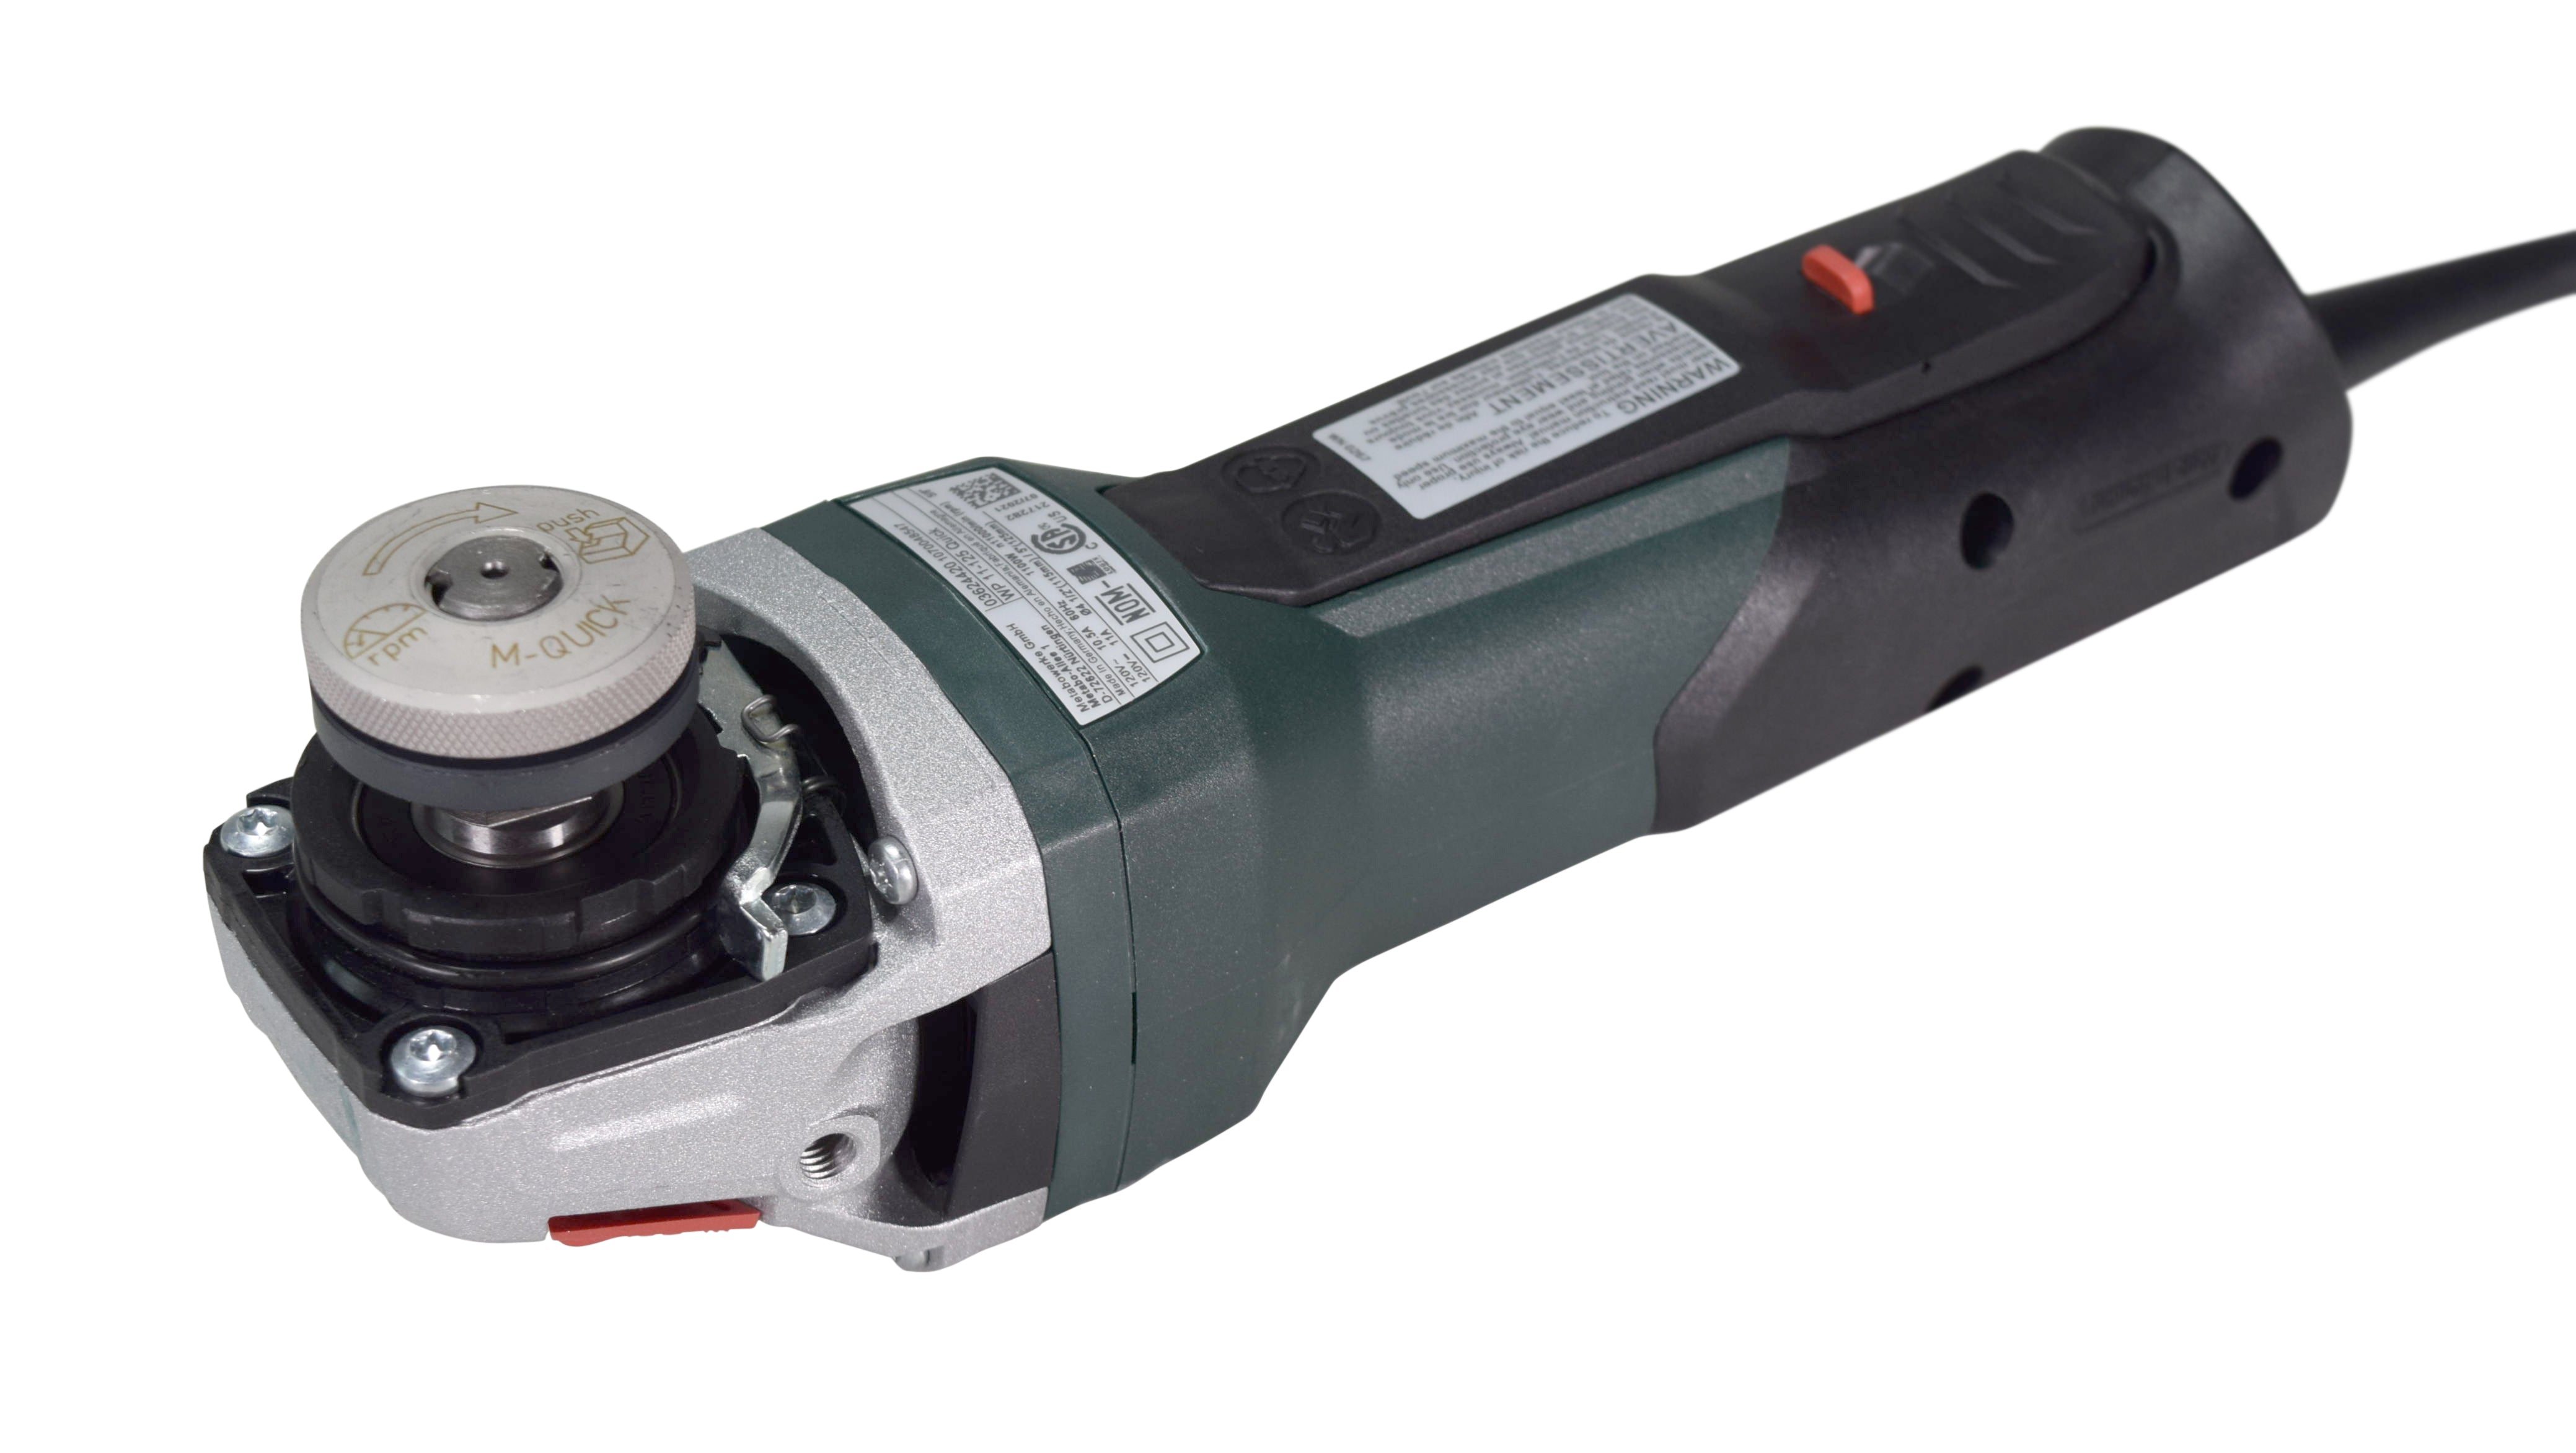 Metabo WP 11-125 Quick 4-1/2"- 5" Angle Grinder